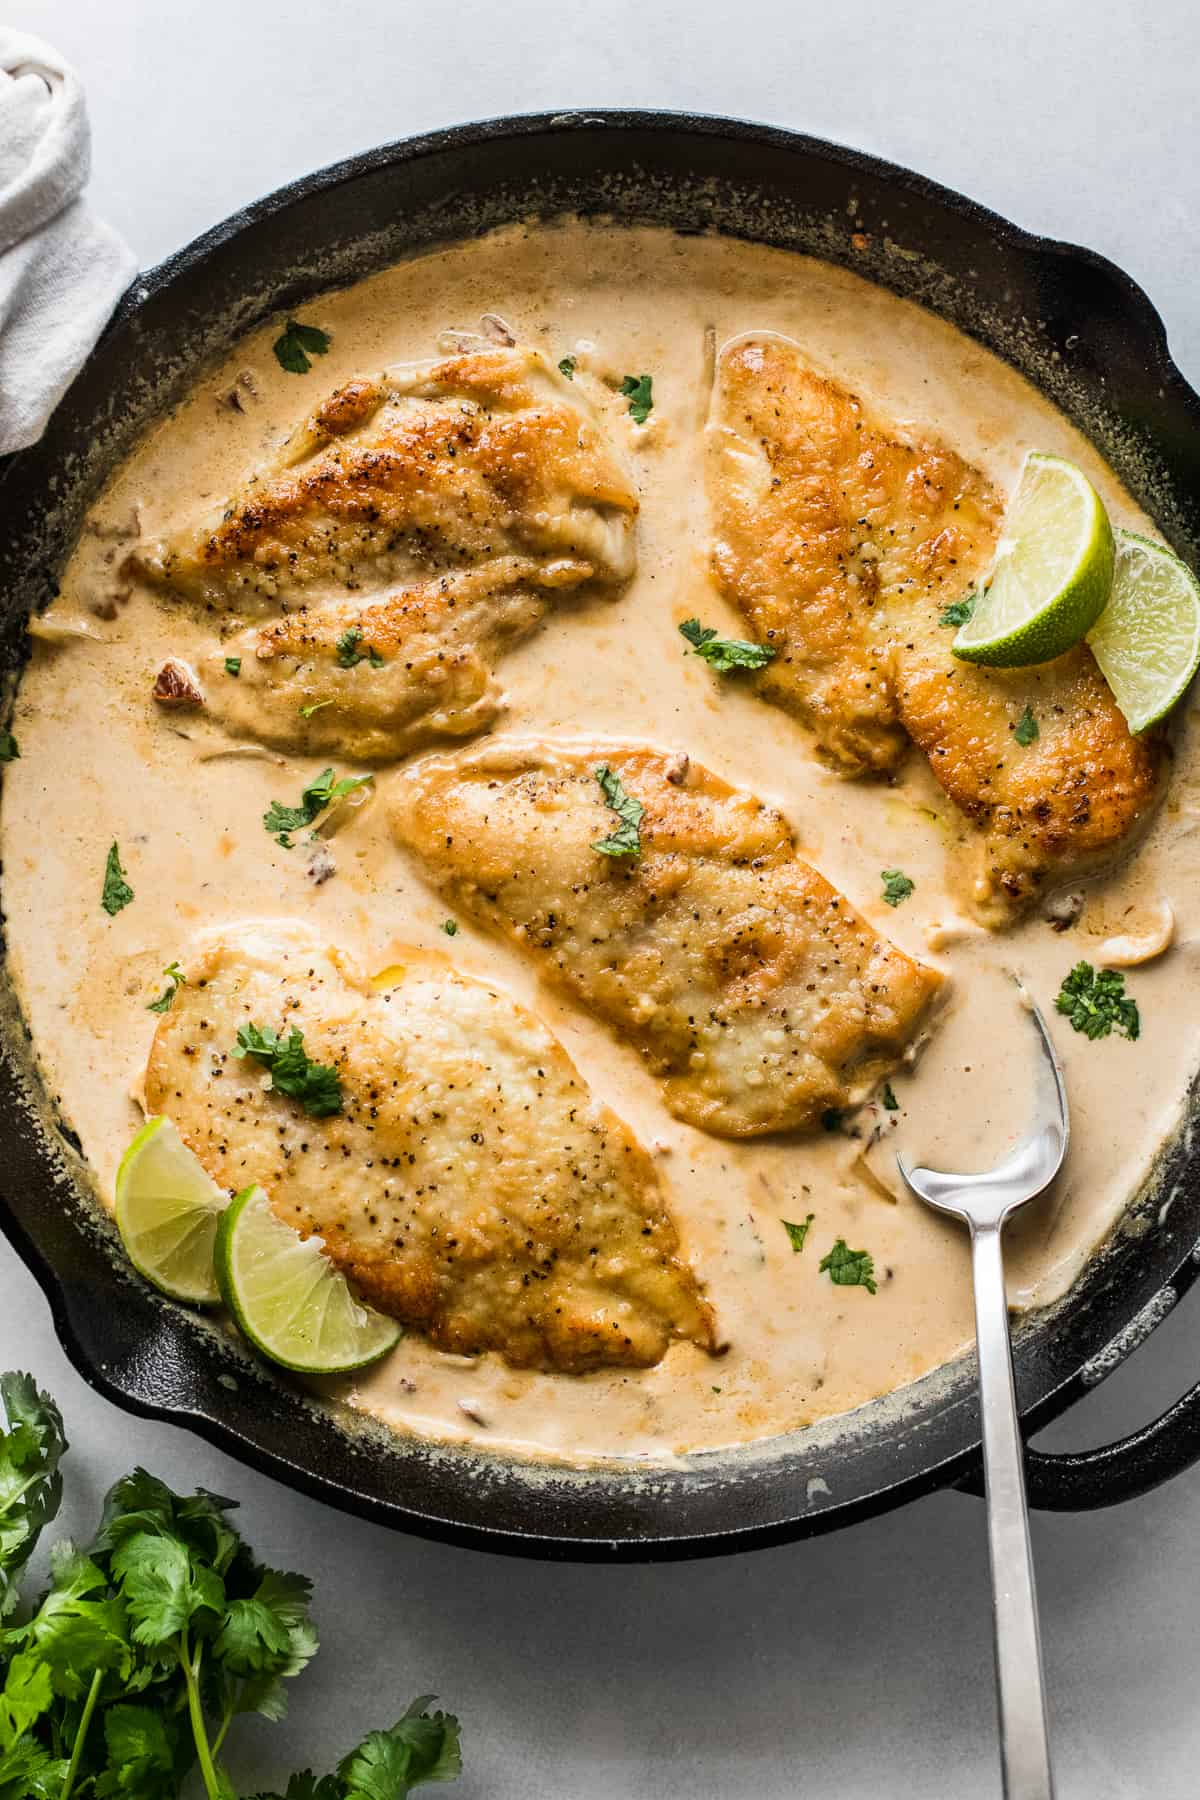 Pan-fried chicken in a chipotle cream sauce in a large skillet.